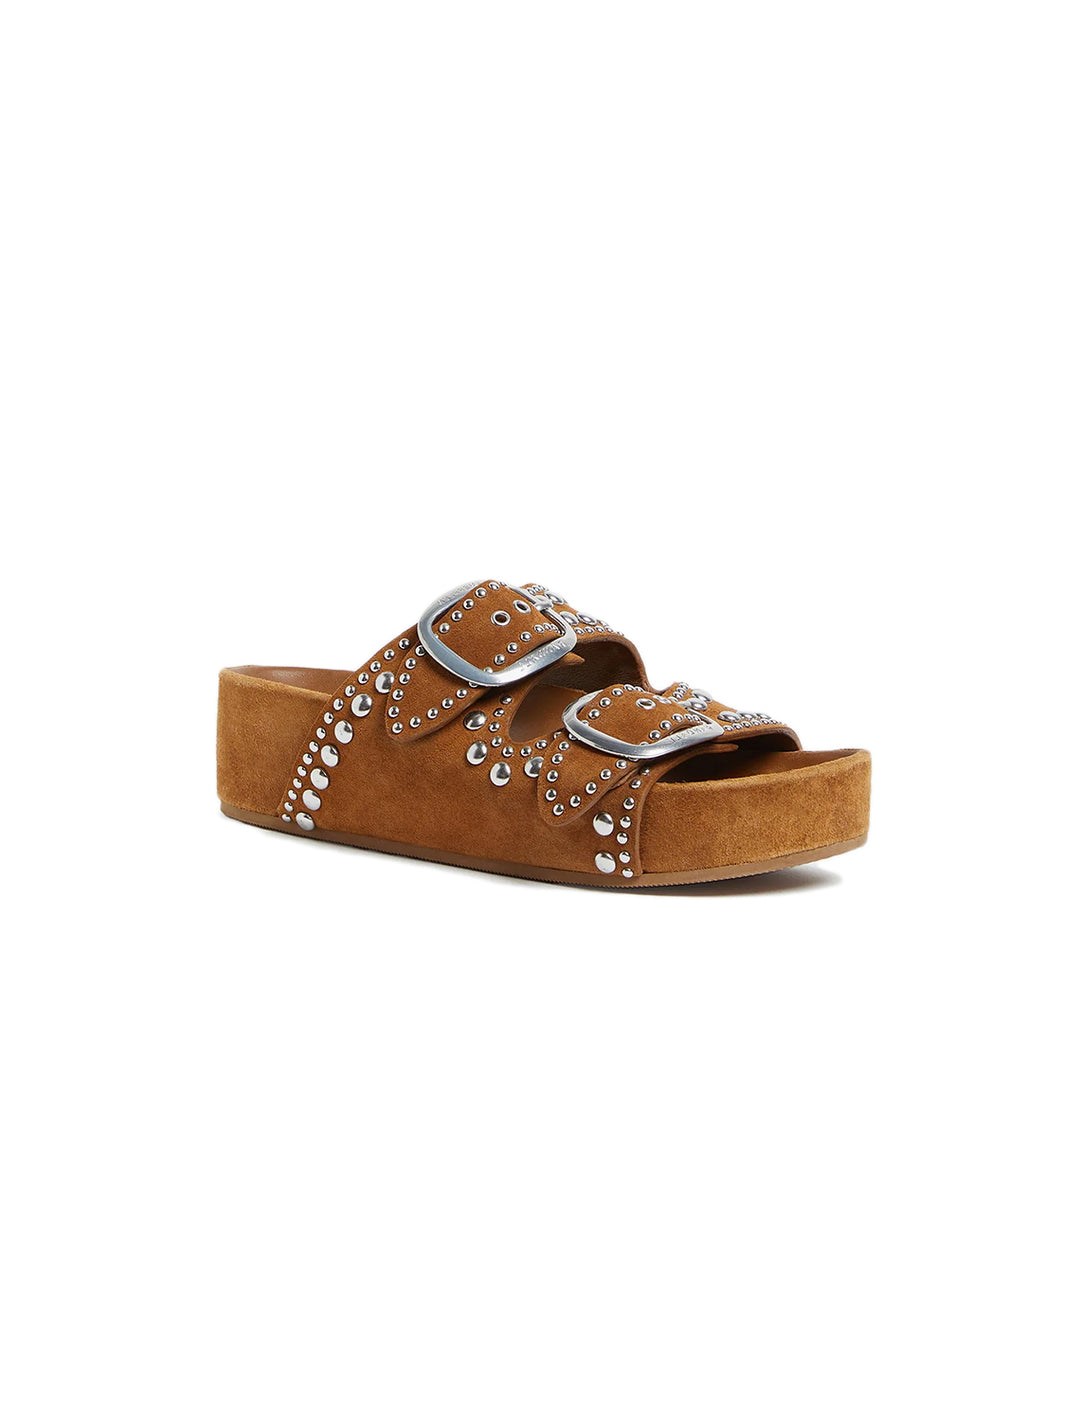 Front angle view of Loeffler Randall's jack two band sandal with studs.